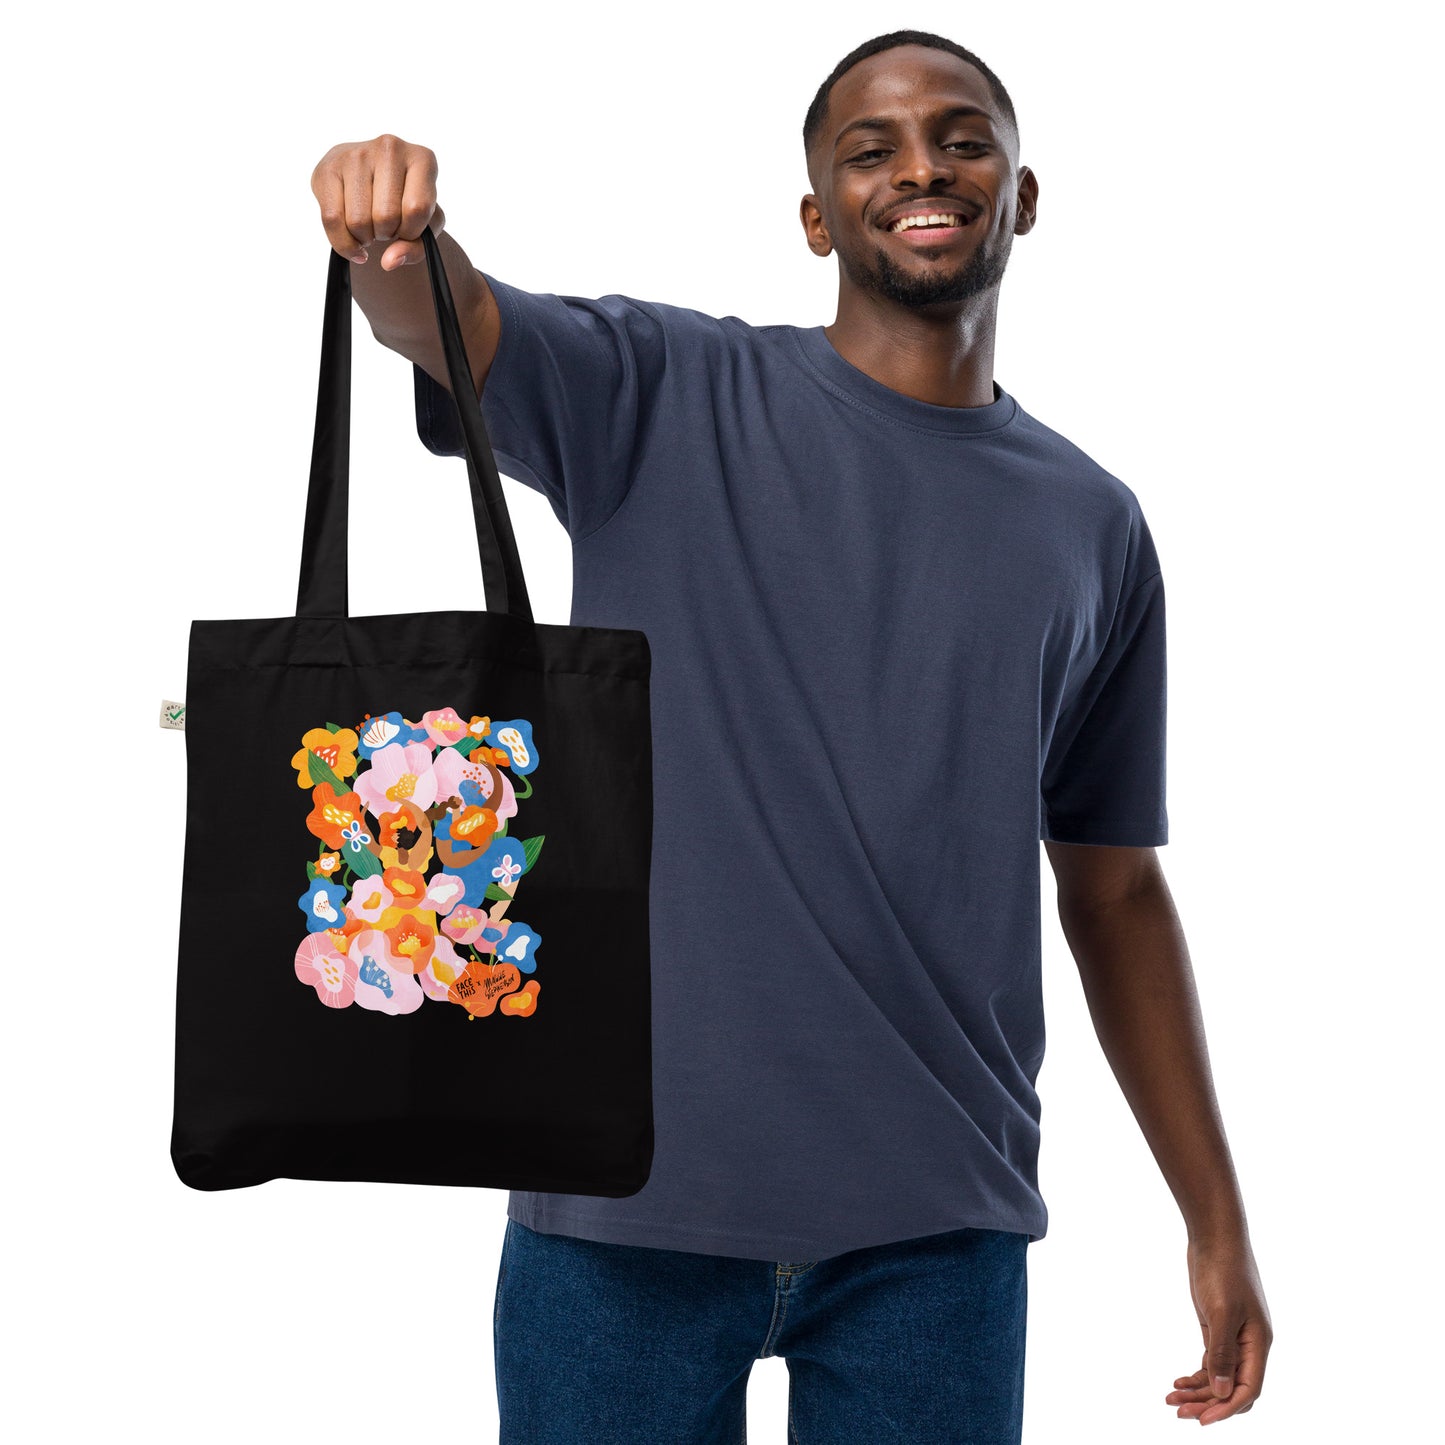 Maggie Stephenson x Face This tote bag